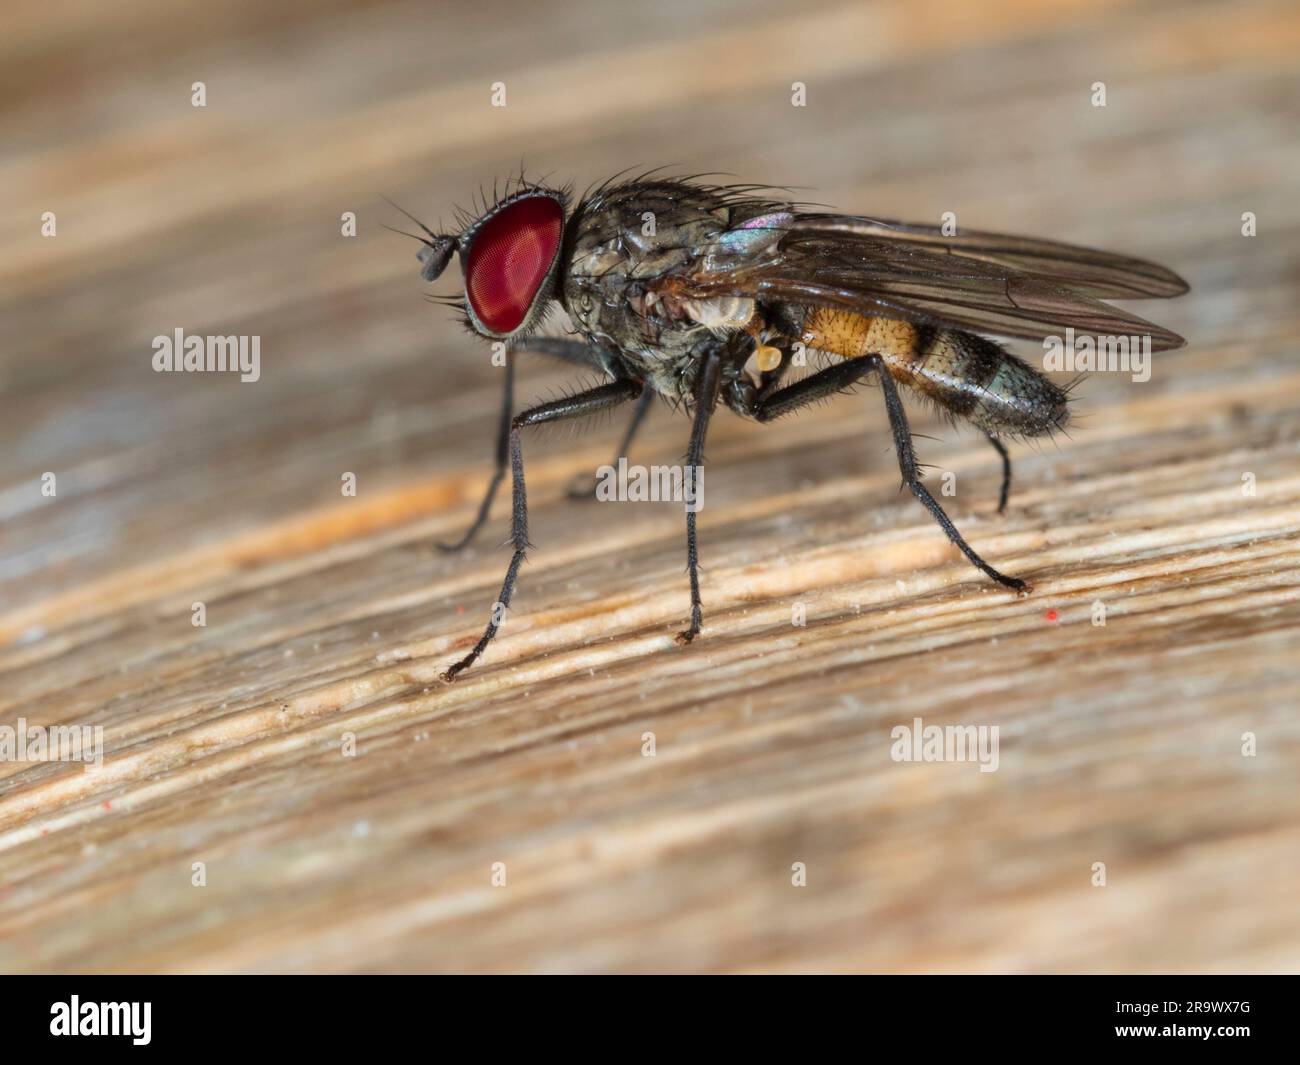 Side view of an adult male lesser house fly, Fannia canicularis, a pest species and disease vector Stock Photo